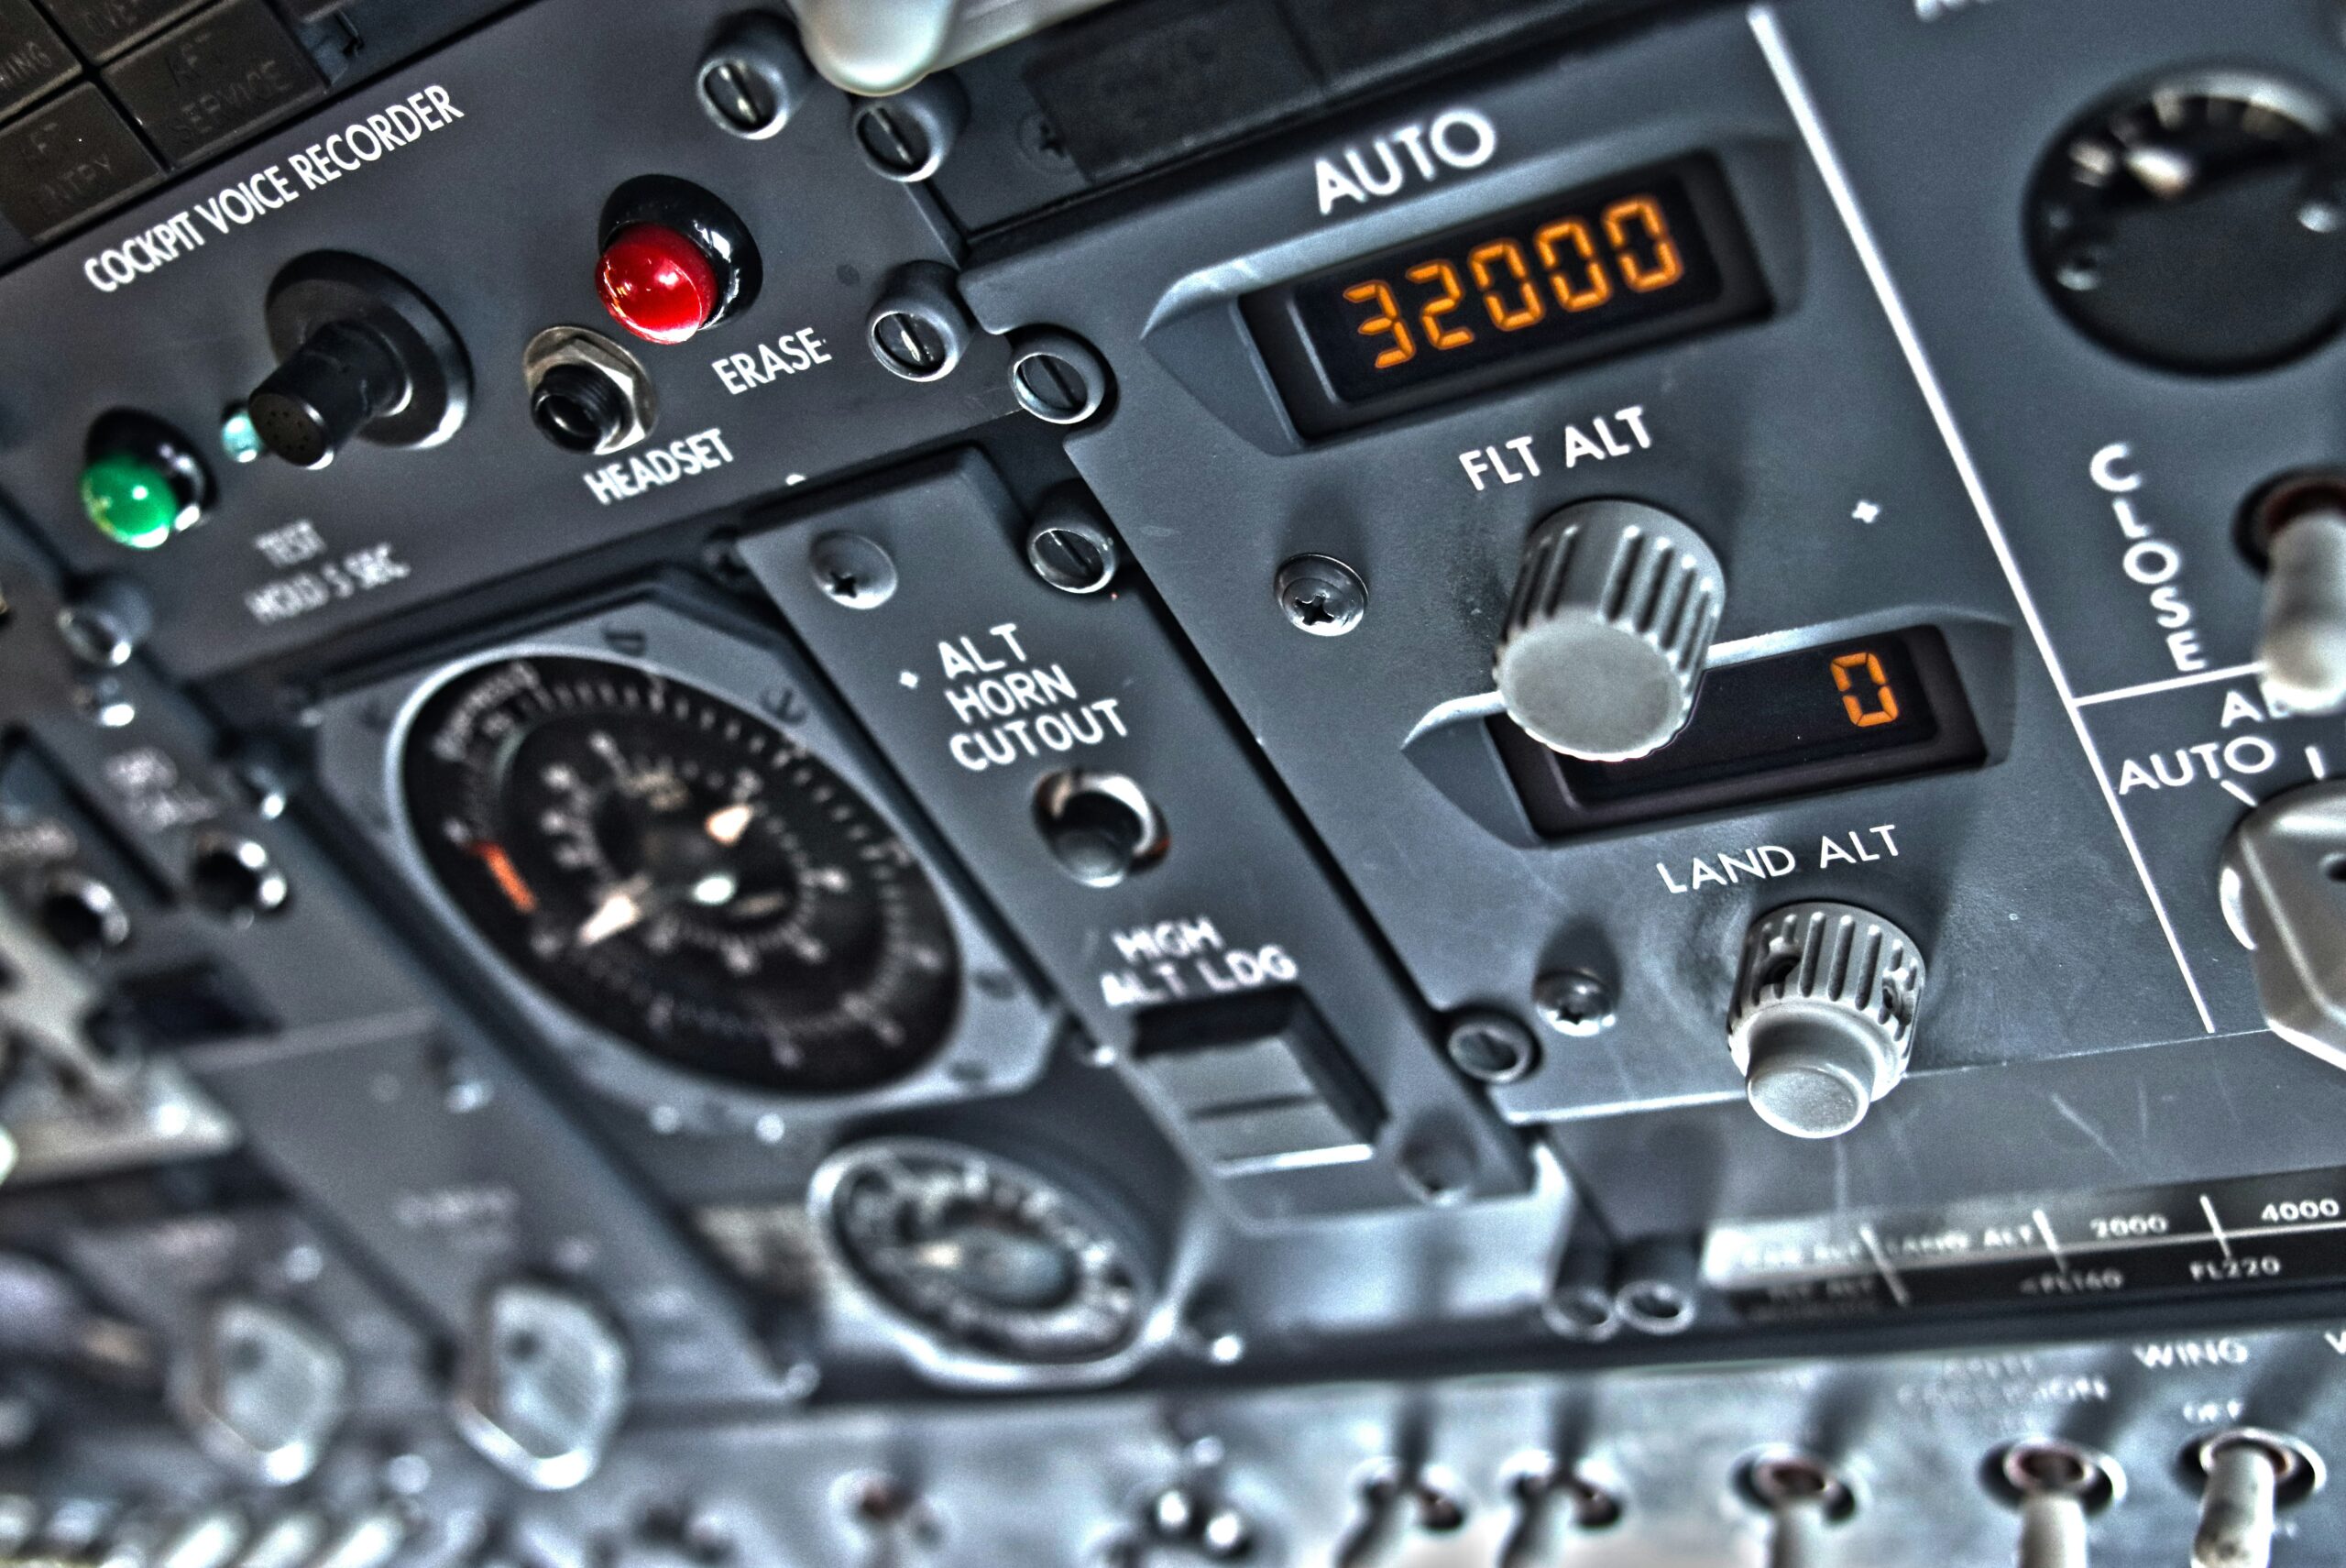 Check out the details about Boeing’s aircraft incidents. 
Pictured: a close up of the cockpit of an airplane